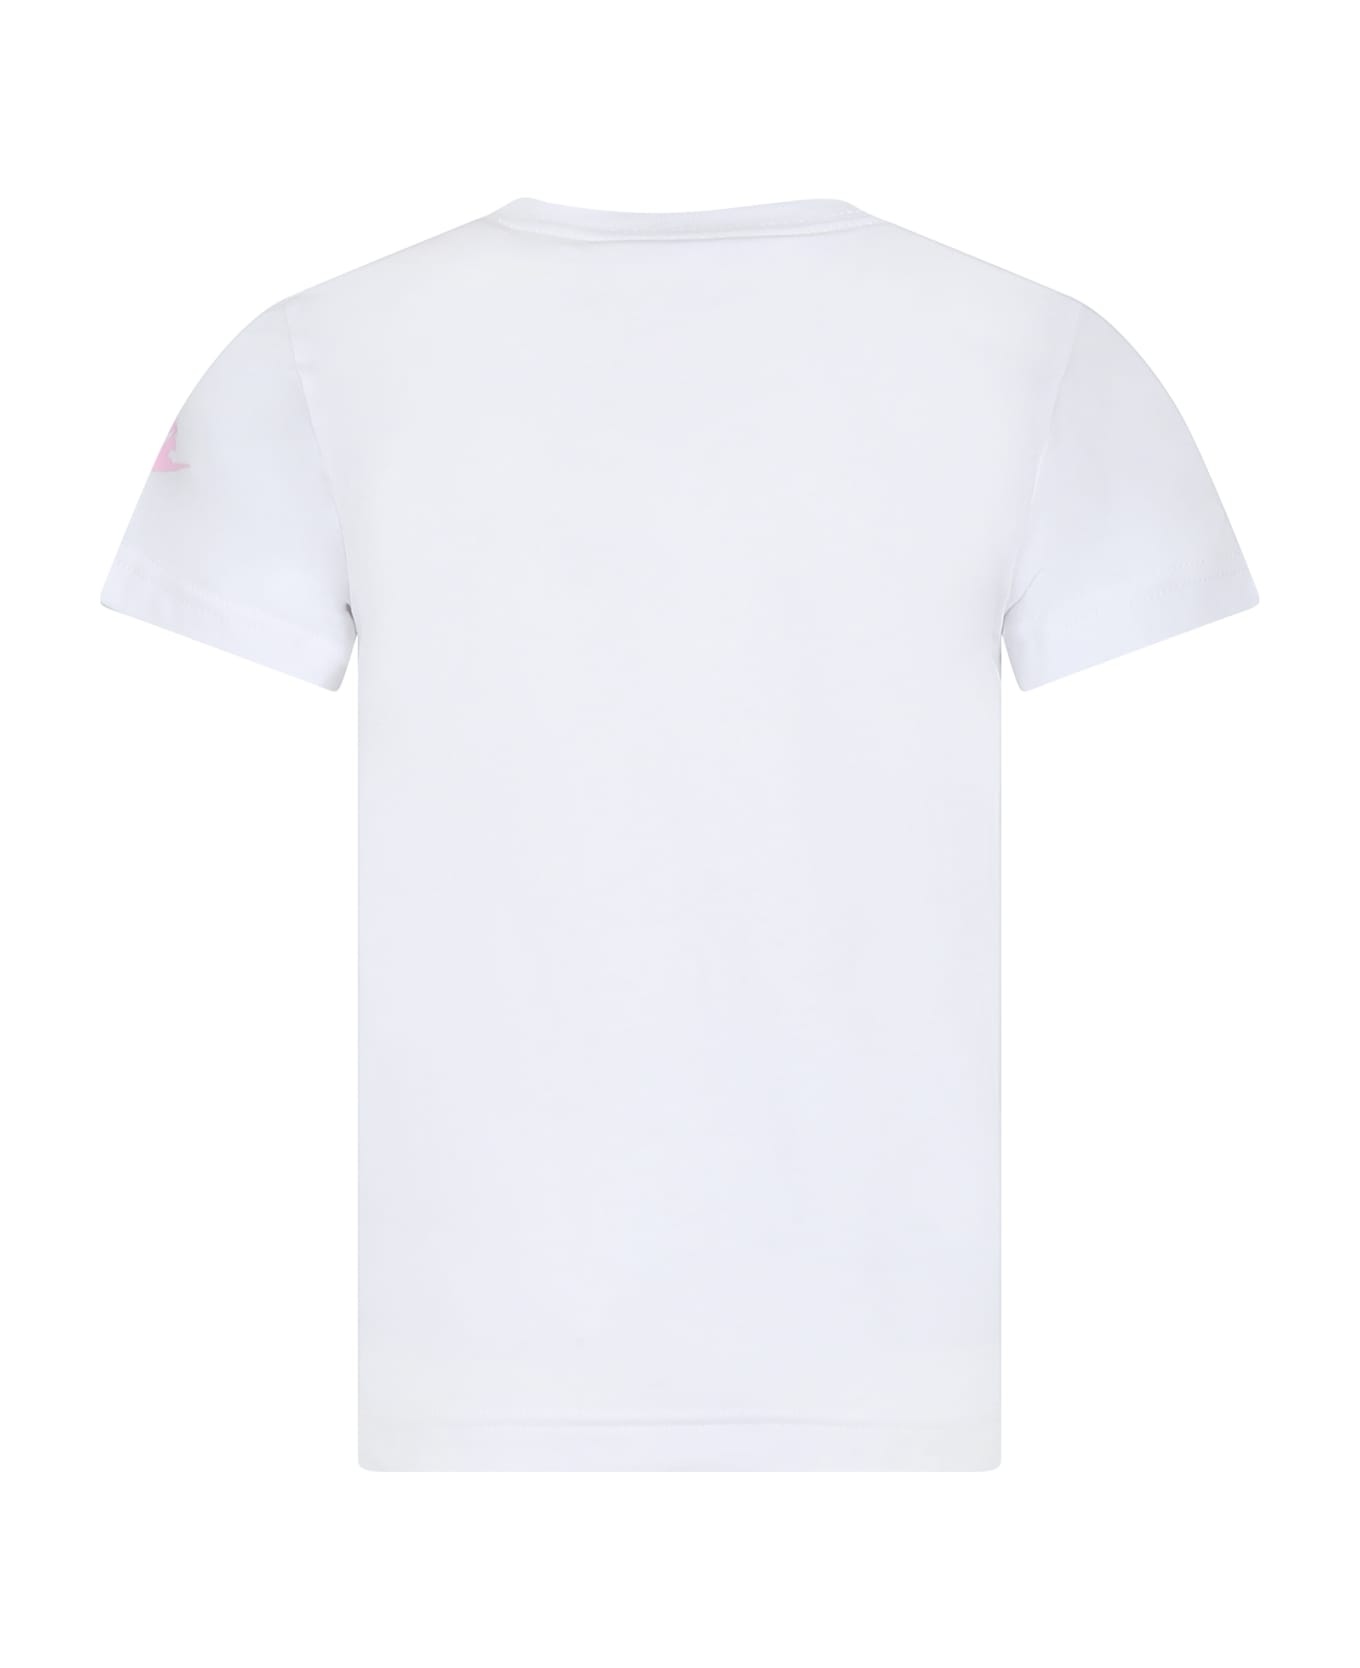 Nike White T-shirt For Boy With Logo And Swoosh - White Tシャツ＆ポロシャツ